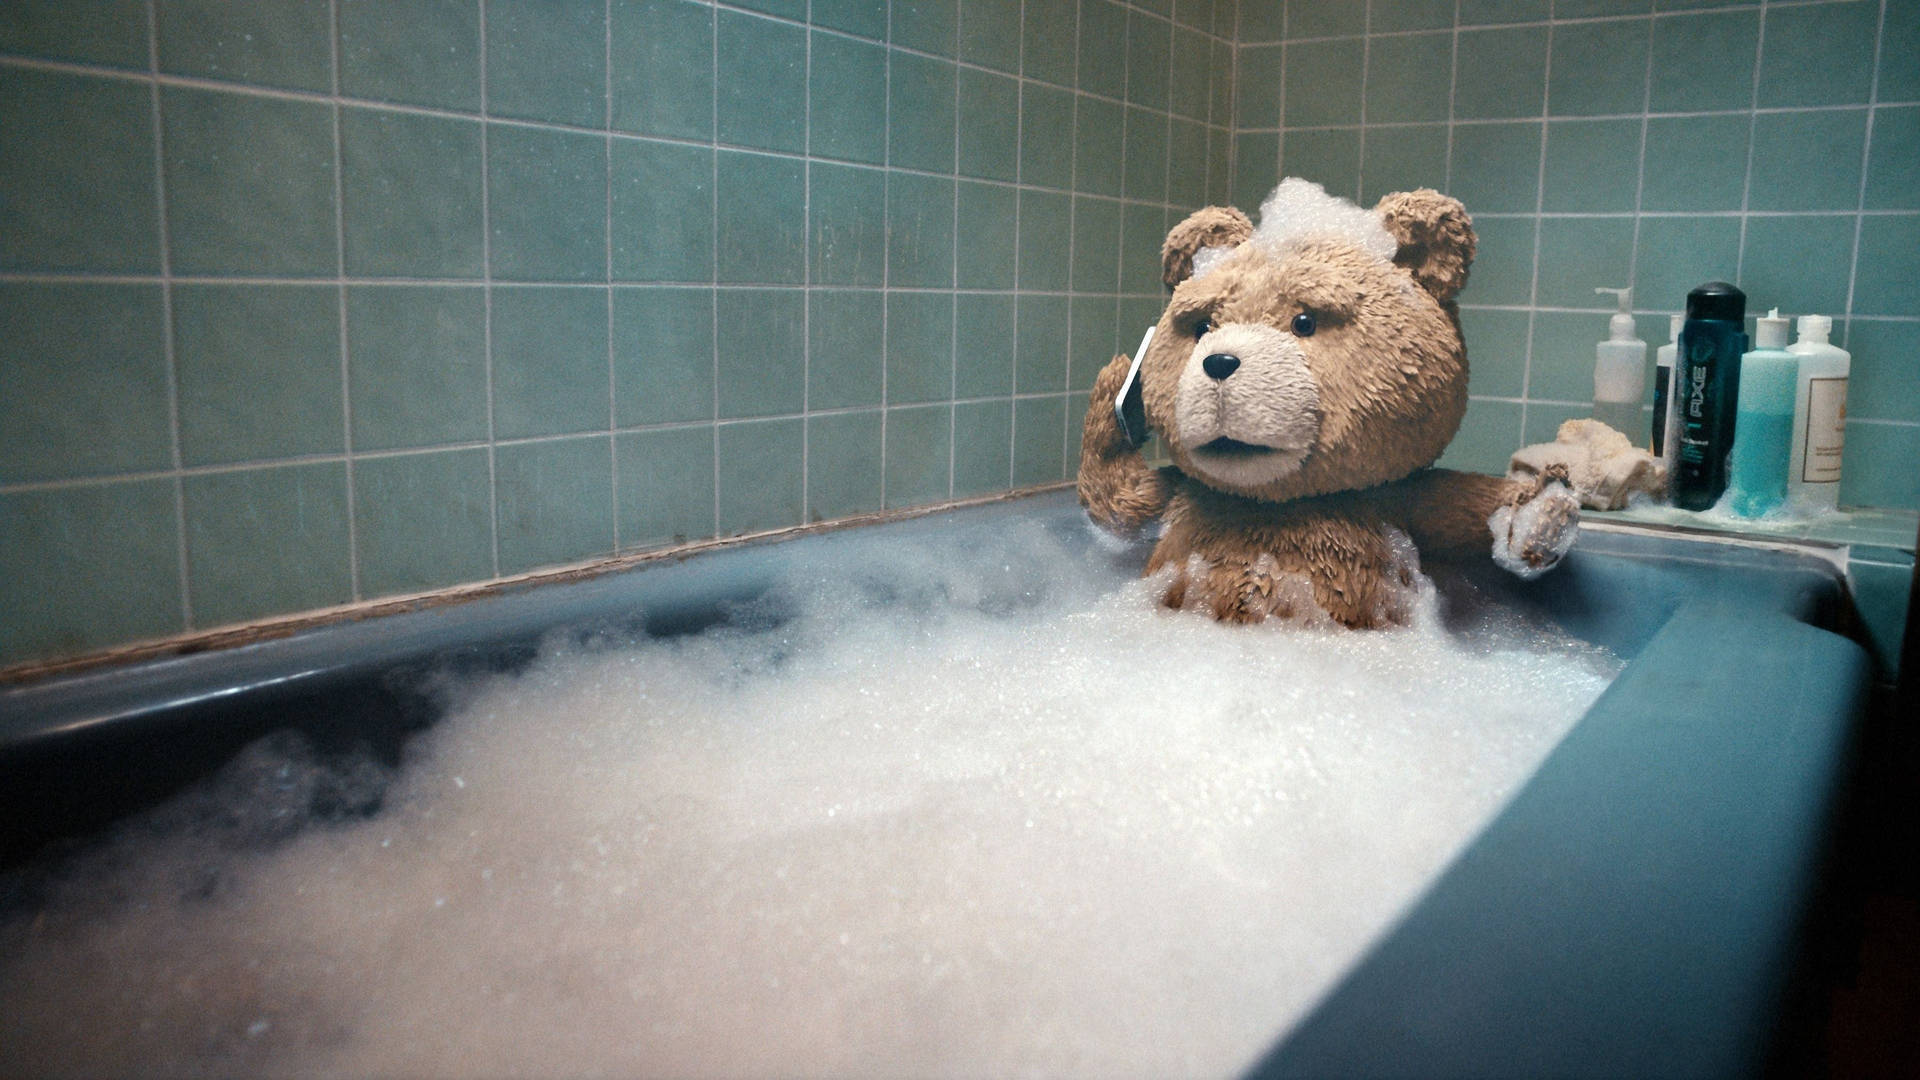 Ted soaking in a hot bath filled with bubbles Wallpaper